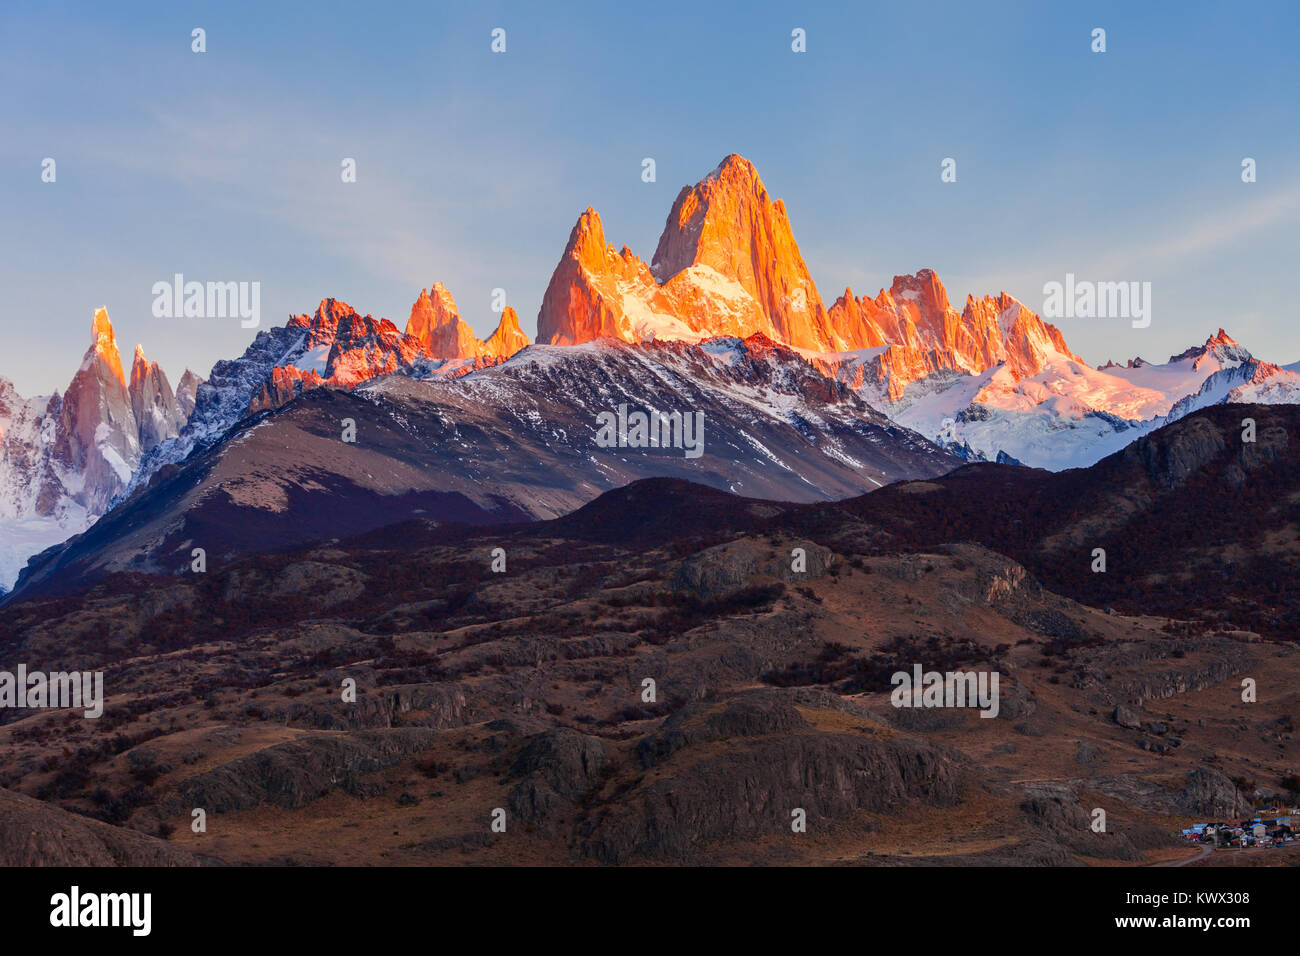 Monte Fitz Roy (also known as Cerro Chalten) aerial sunrise view. Fitz Roy is a mountain located near El Chalten, in the Southern Patagonia, on the bo Stock Photo